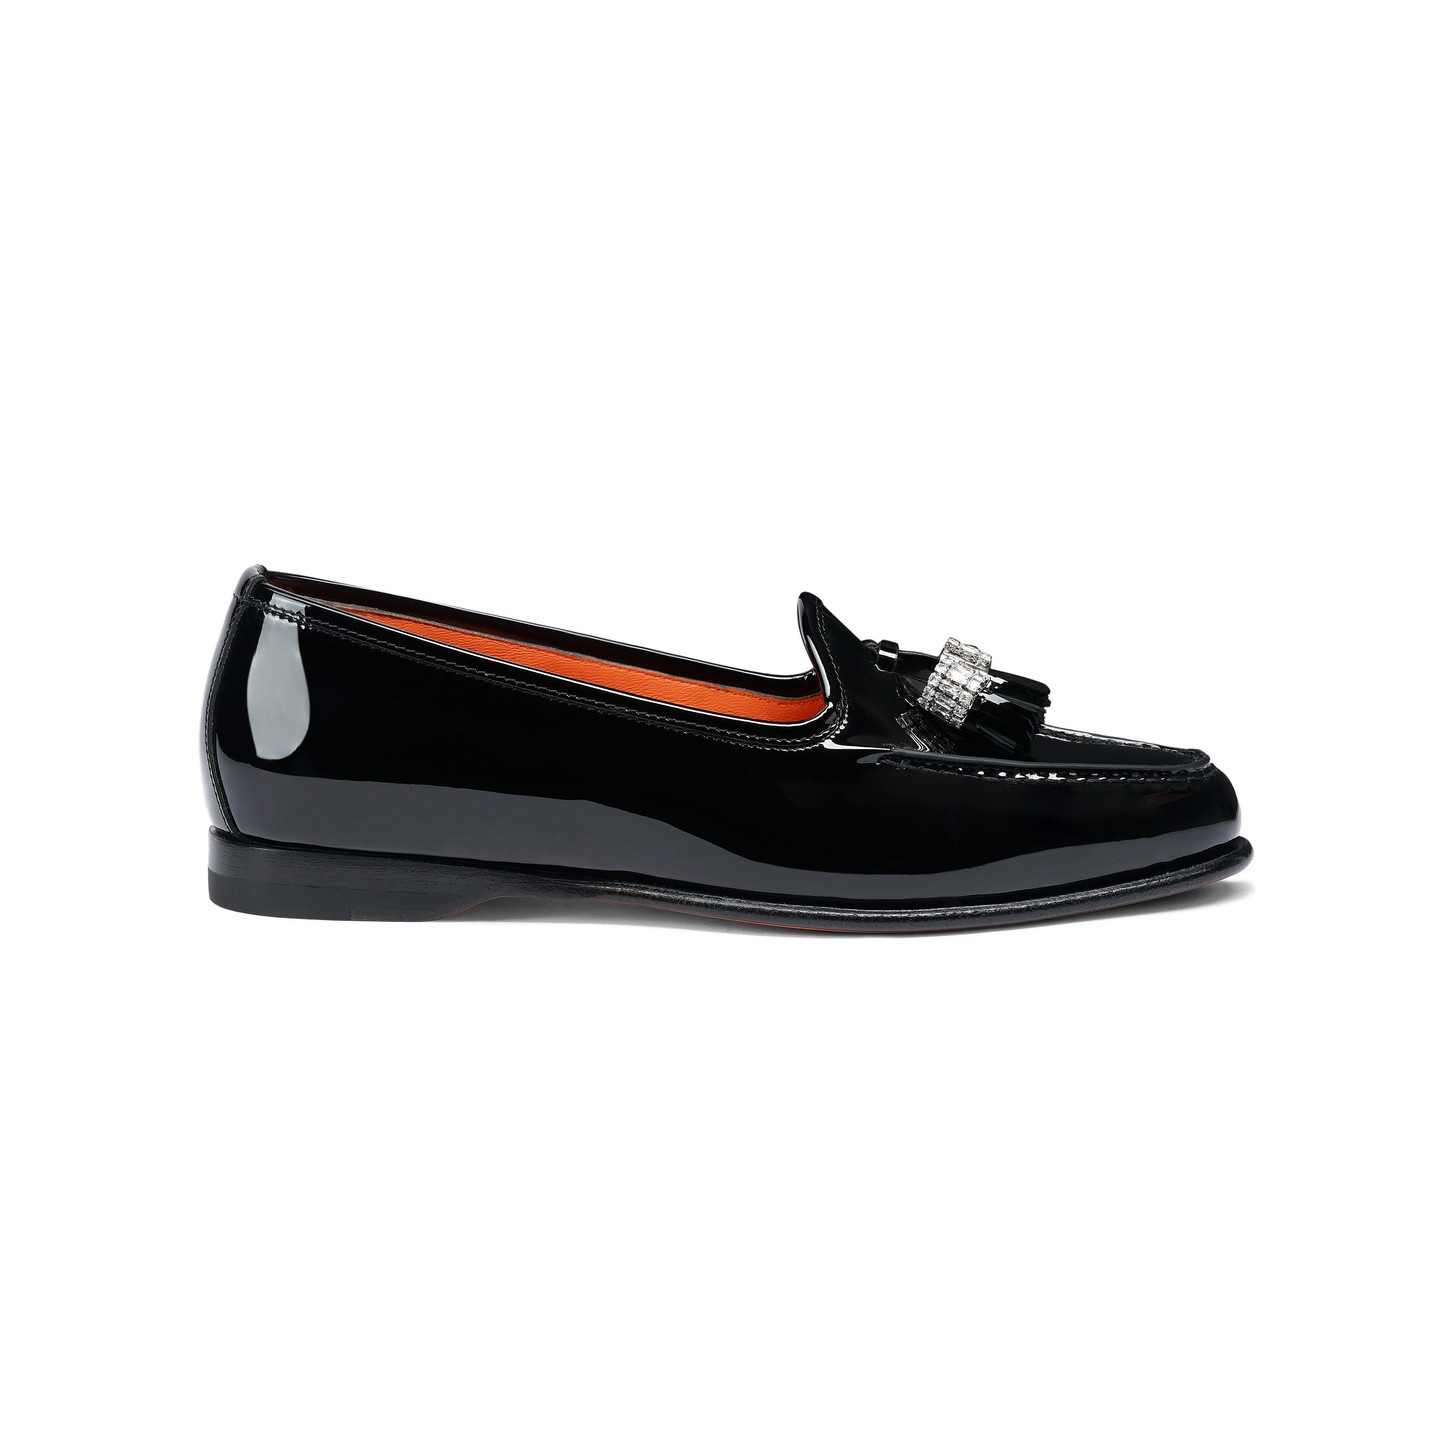 Women's black patent leather Andrea loafer - 1